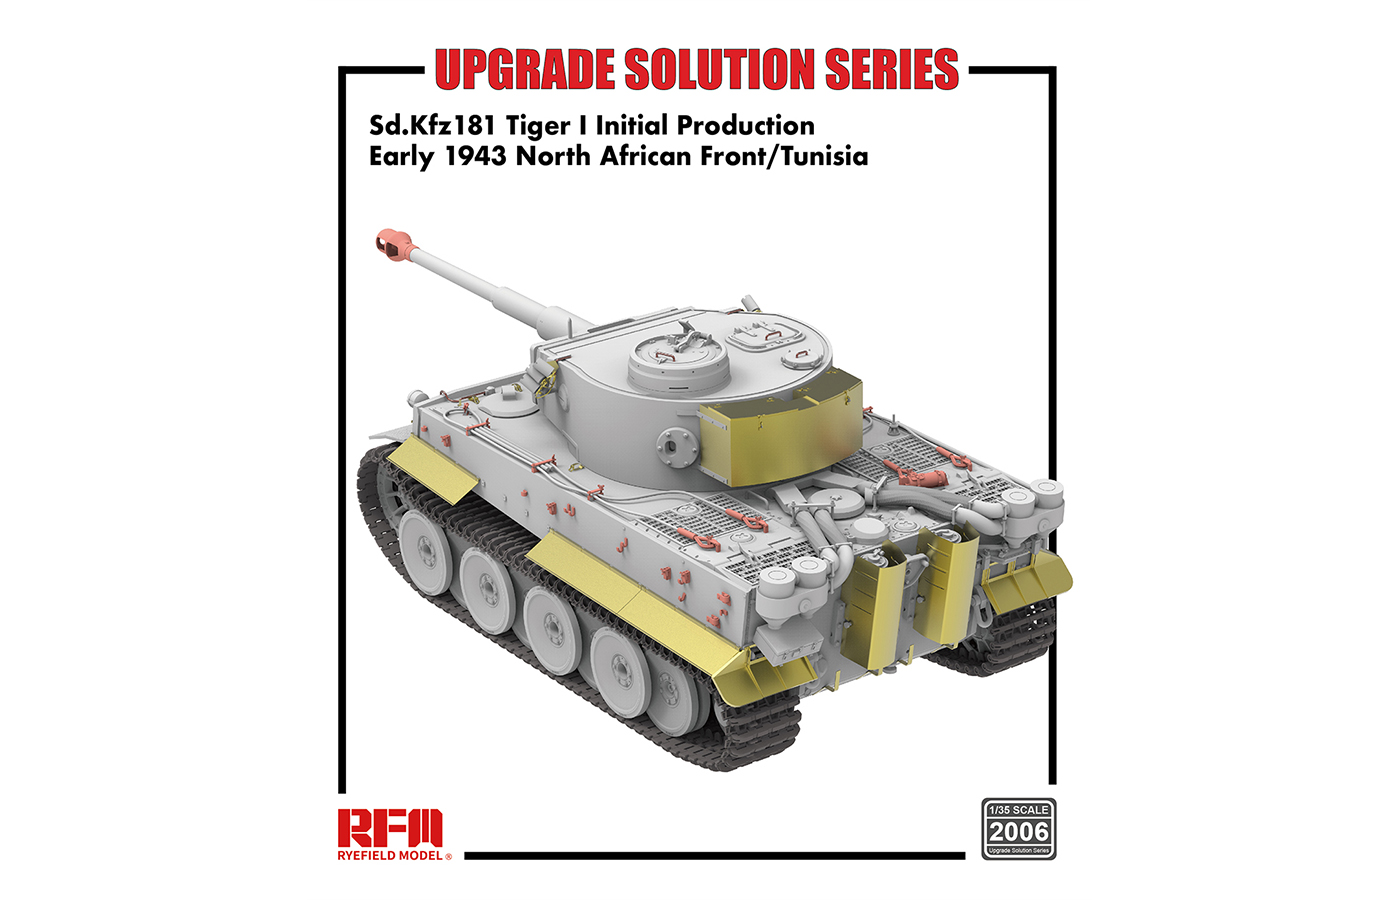 Sd.Kfz 181 Tiger I Initial Production Upgrade Solution Series